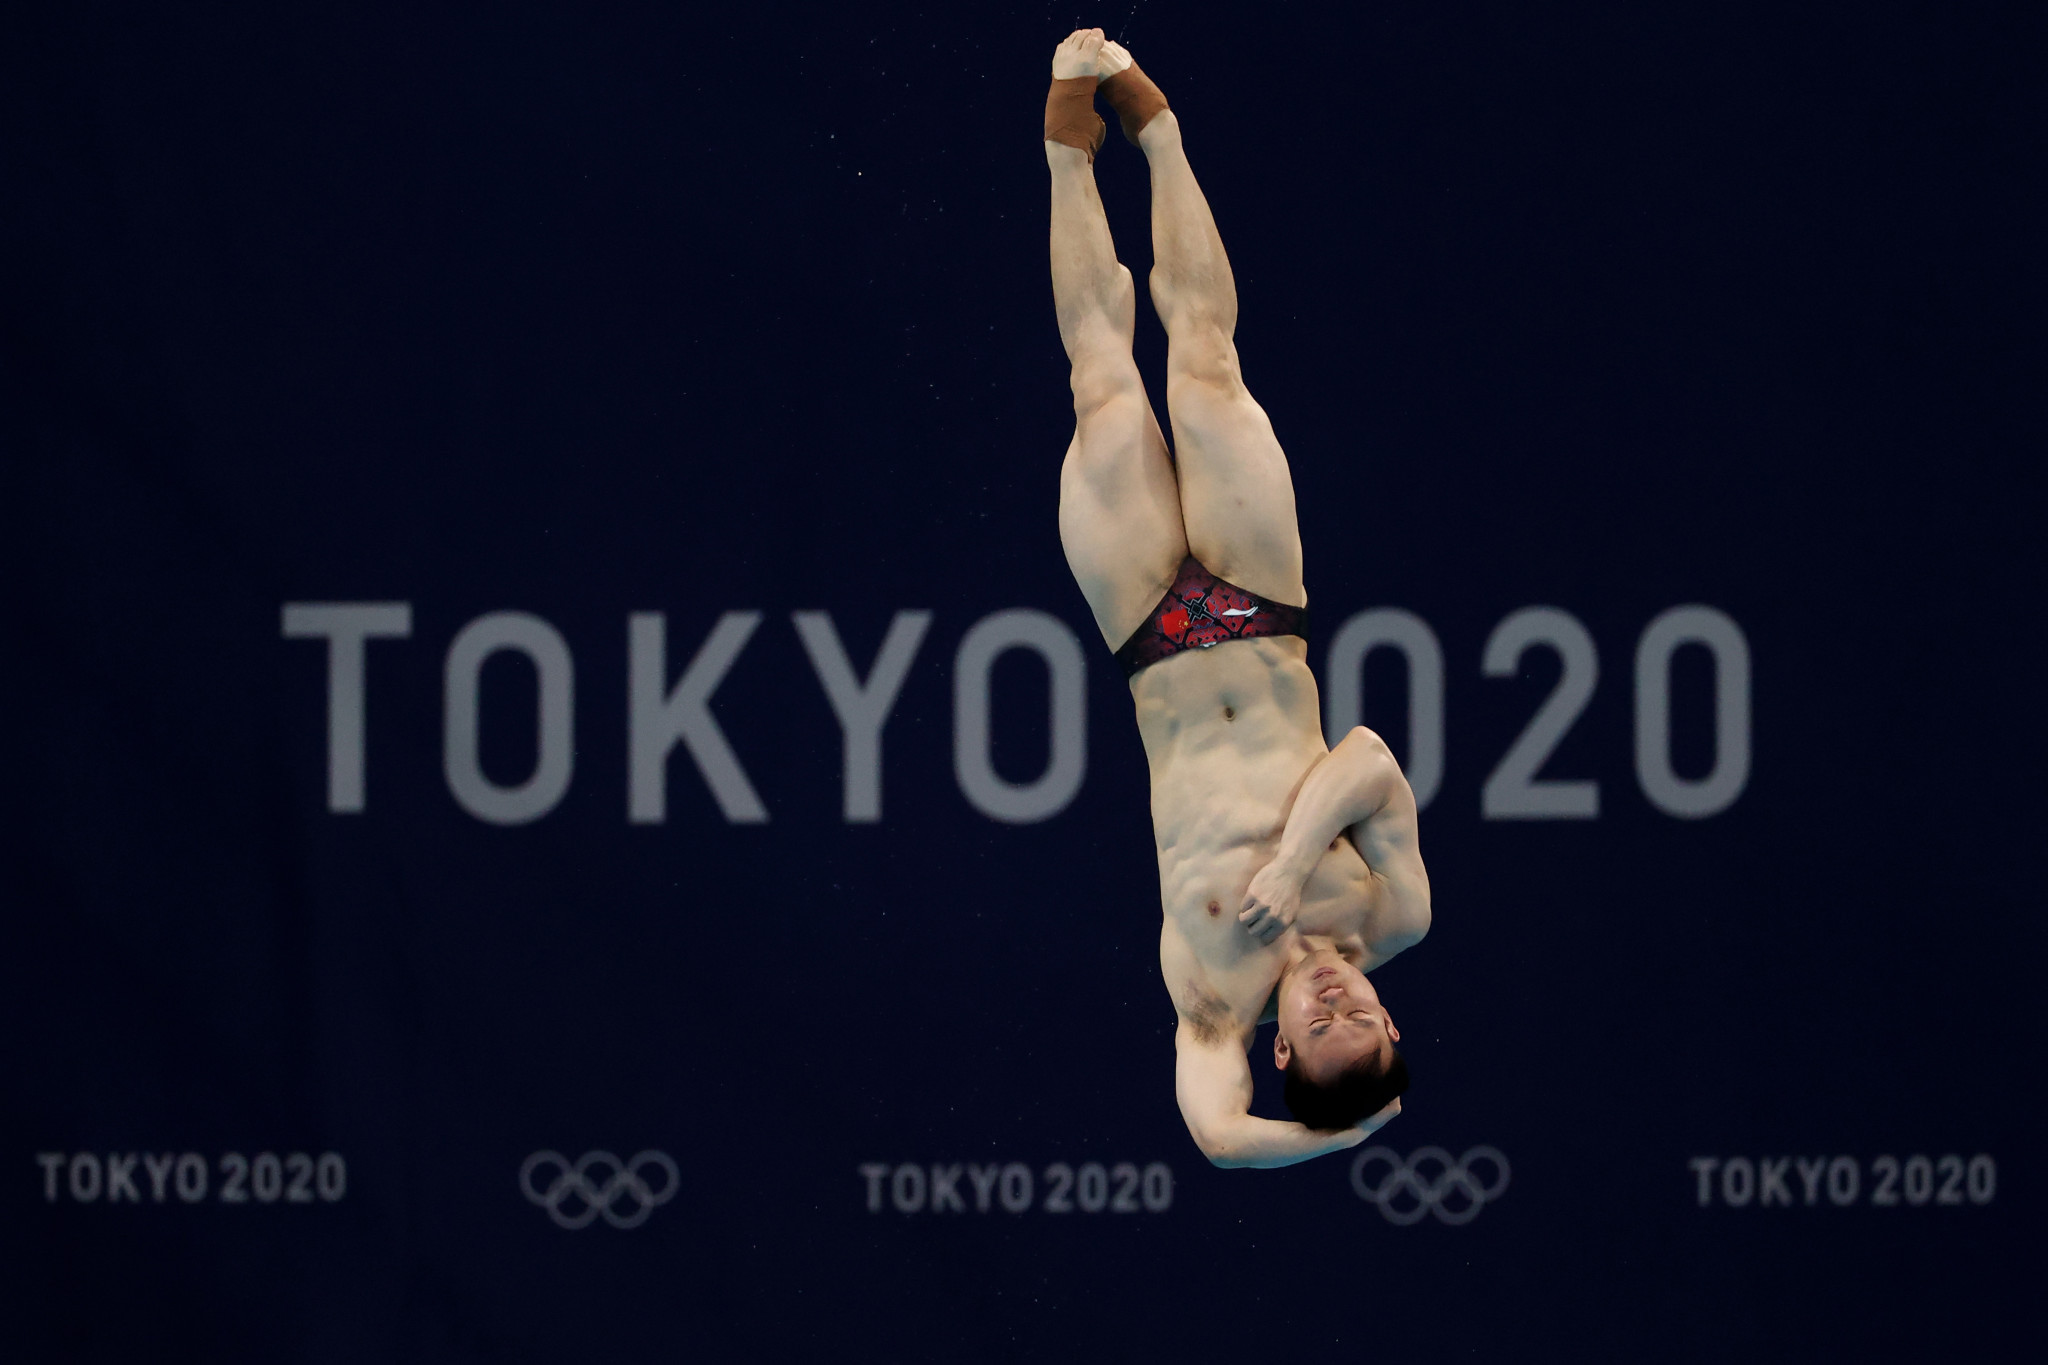 Xie Siyi won two gold medals at Tokyo 2020 ©Getty Images